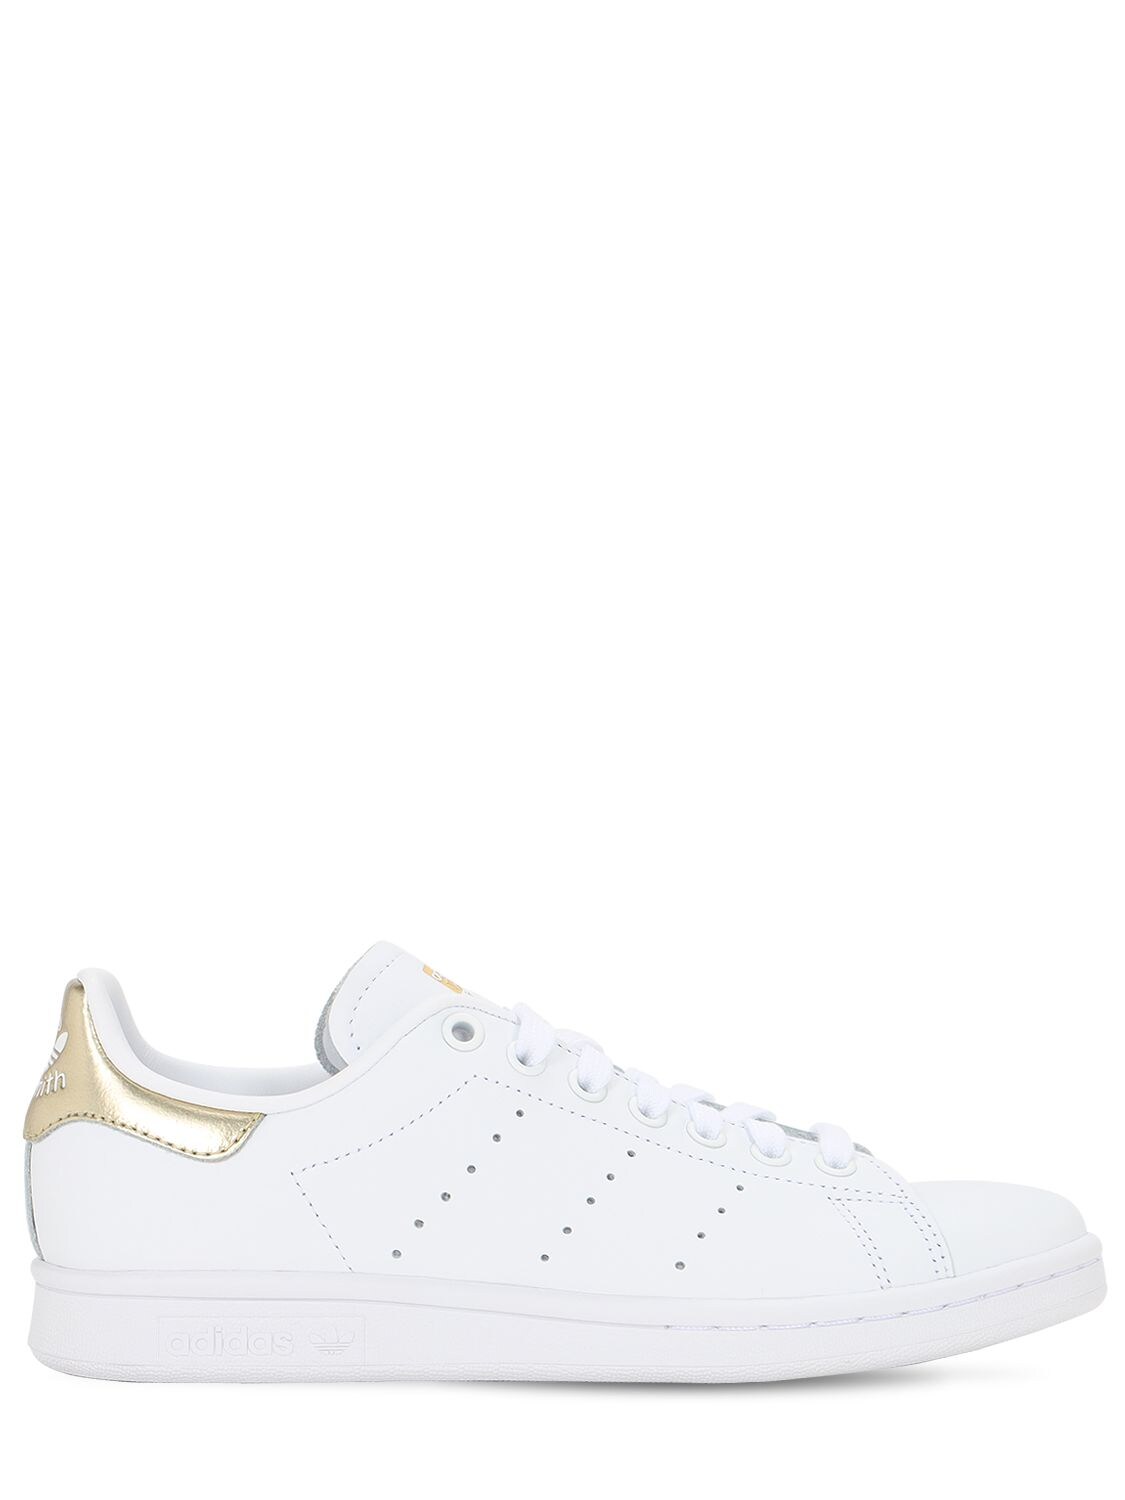 ADIDAS ORIGINALS STAN SMITH LEATHER trainers,70IWAN007-V0HJVEU1